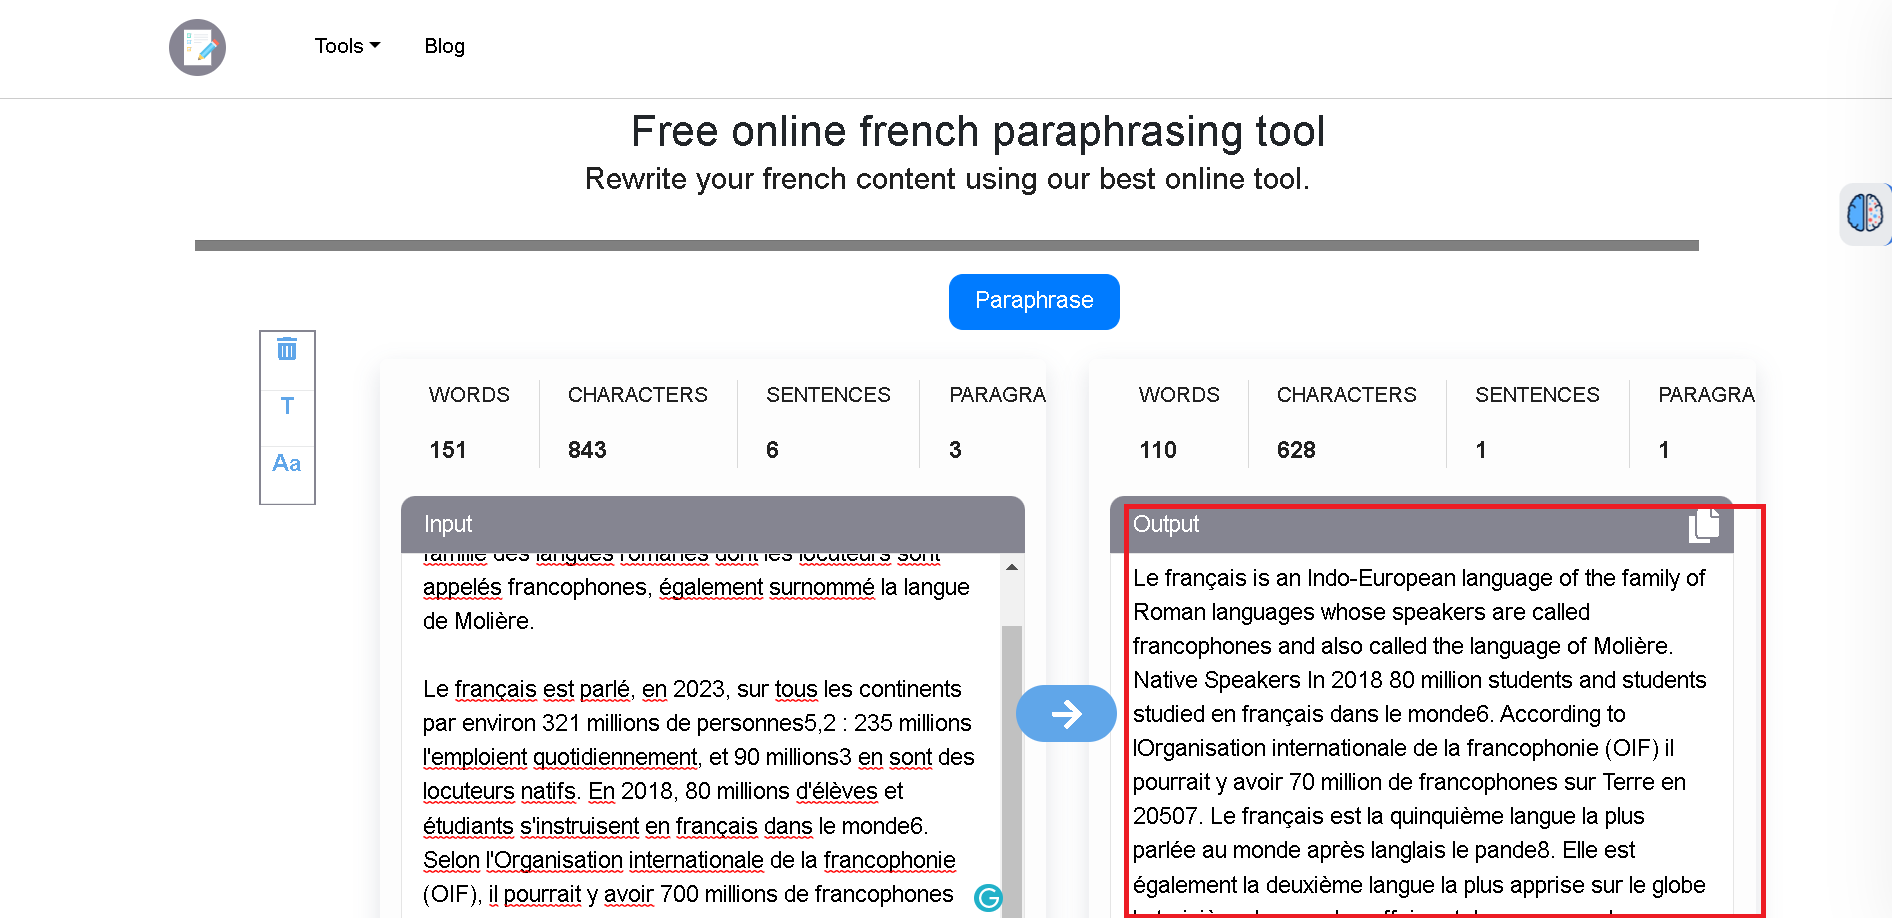 Contenttool.io can paraphrase French language content